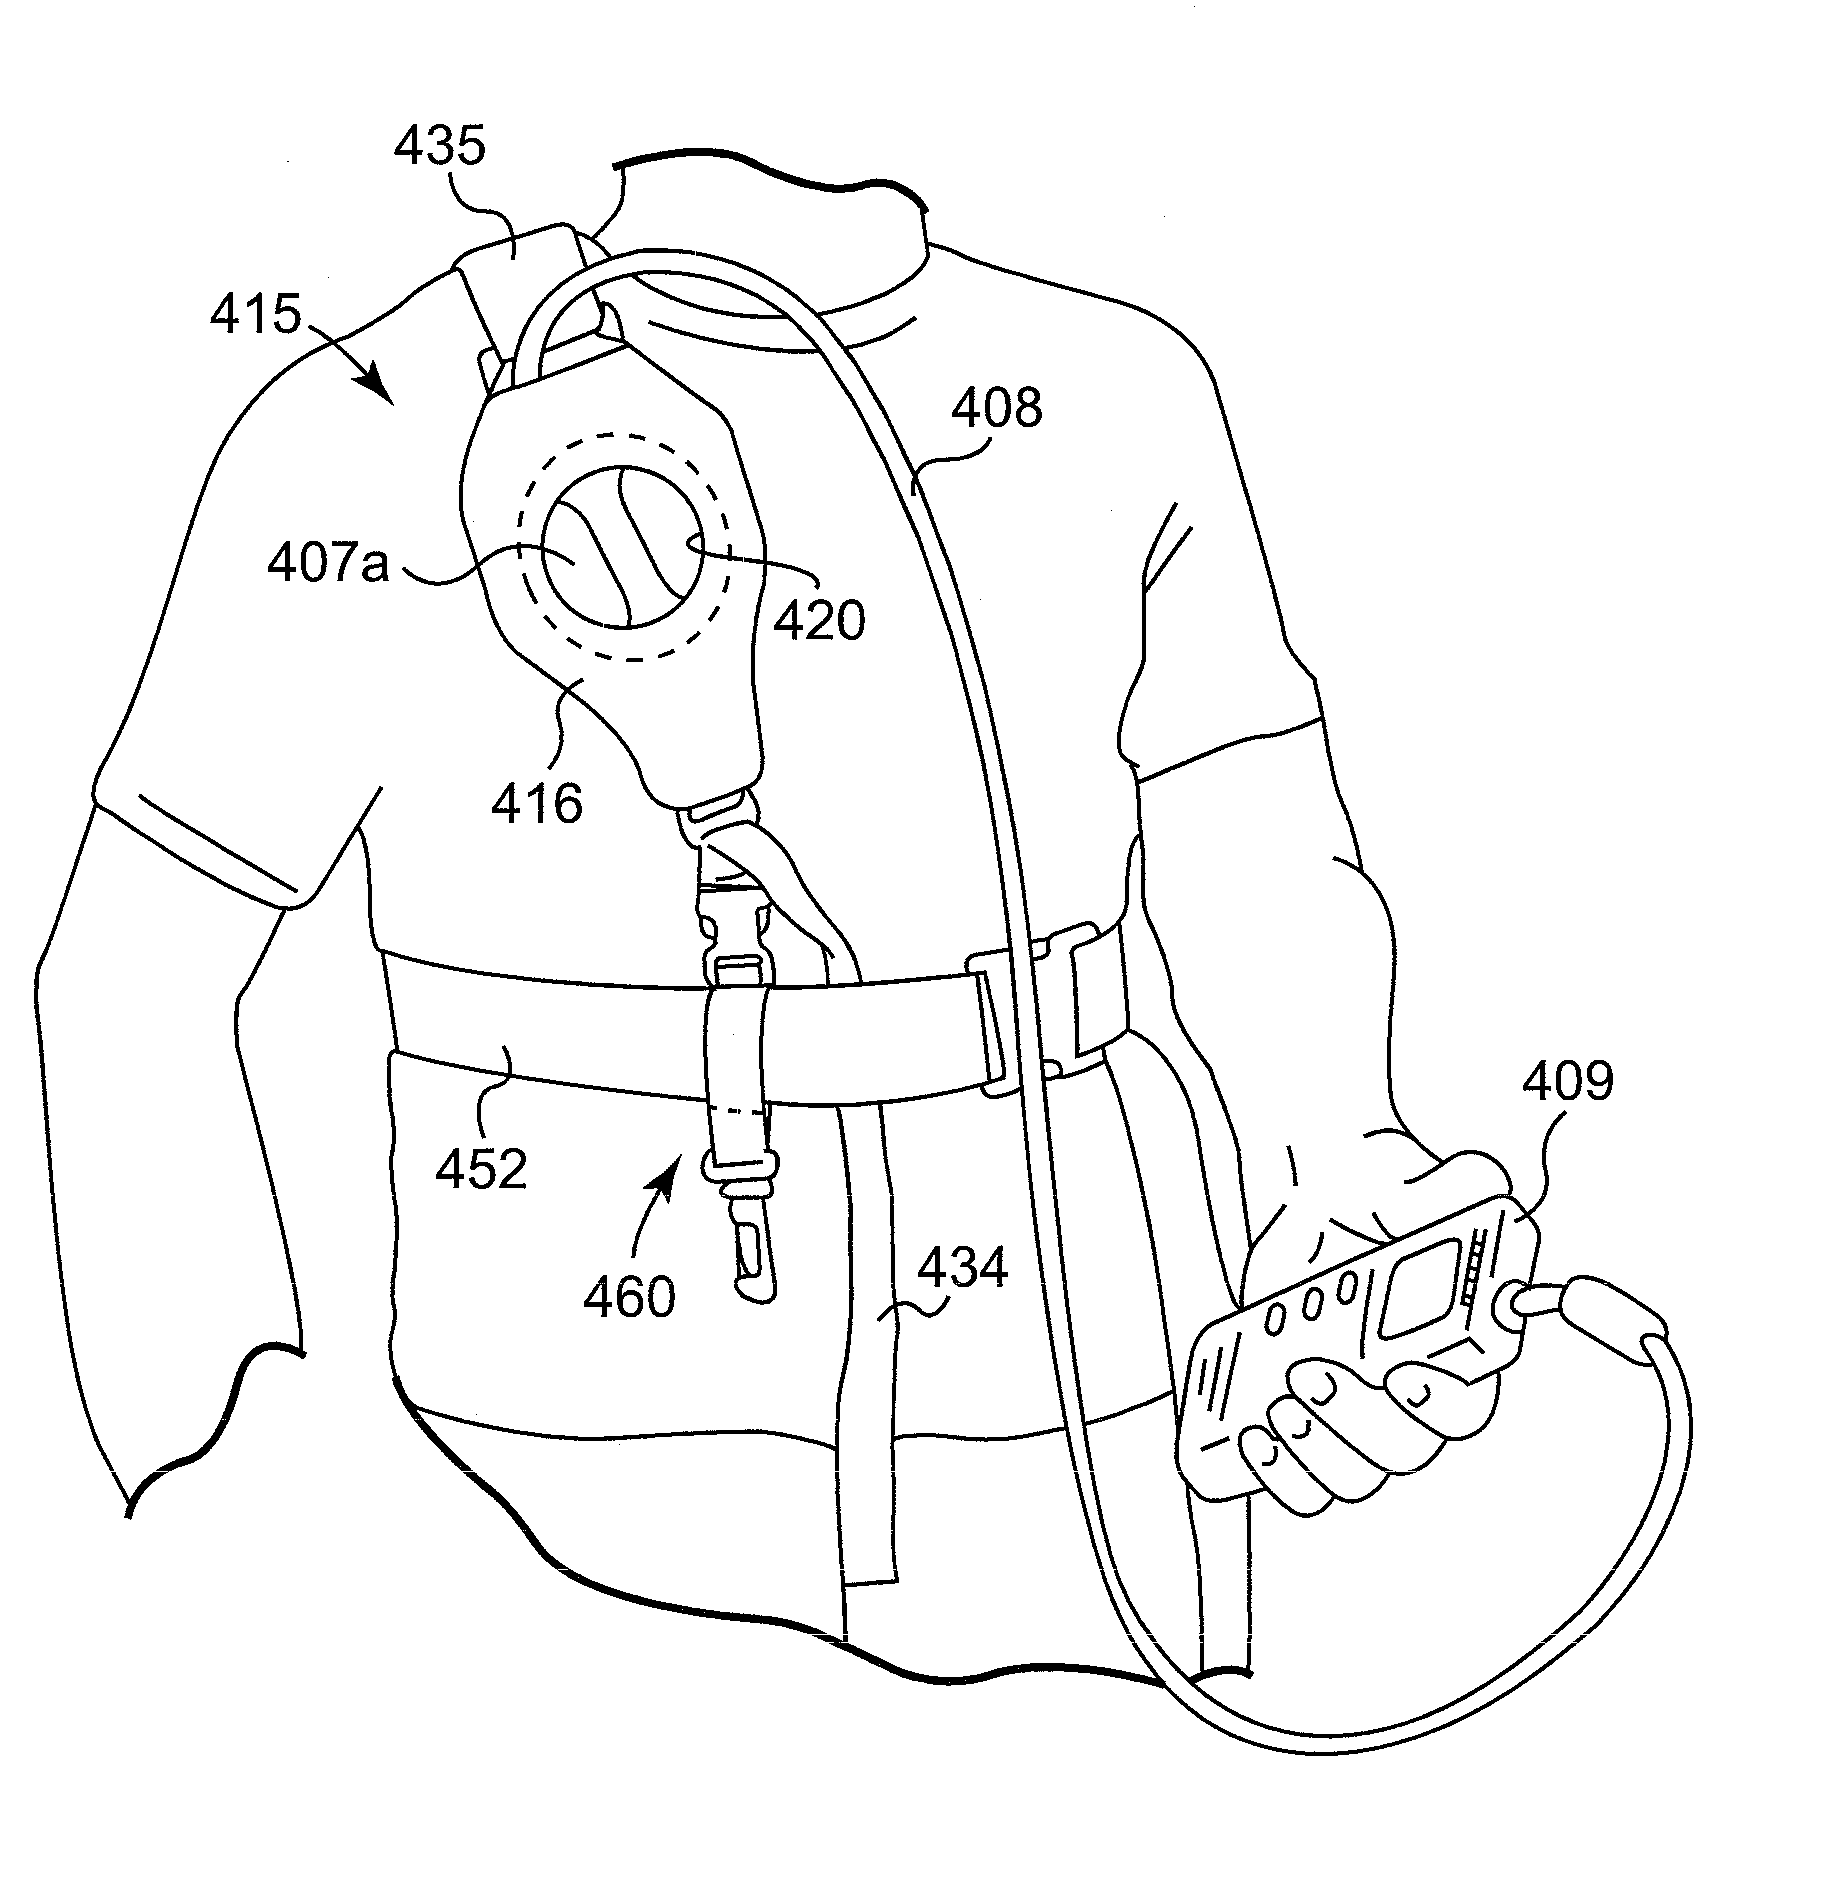 Holster for charging pectorally implanted medical devices